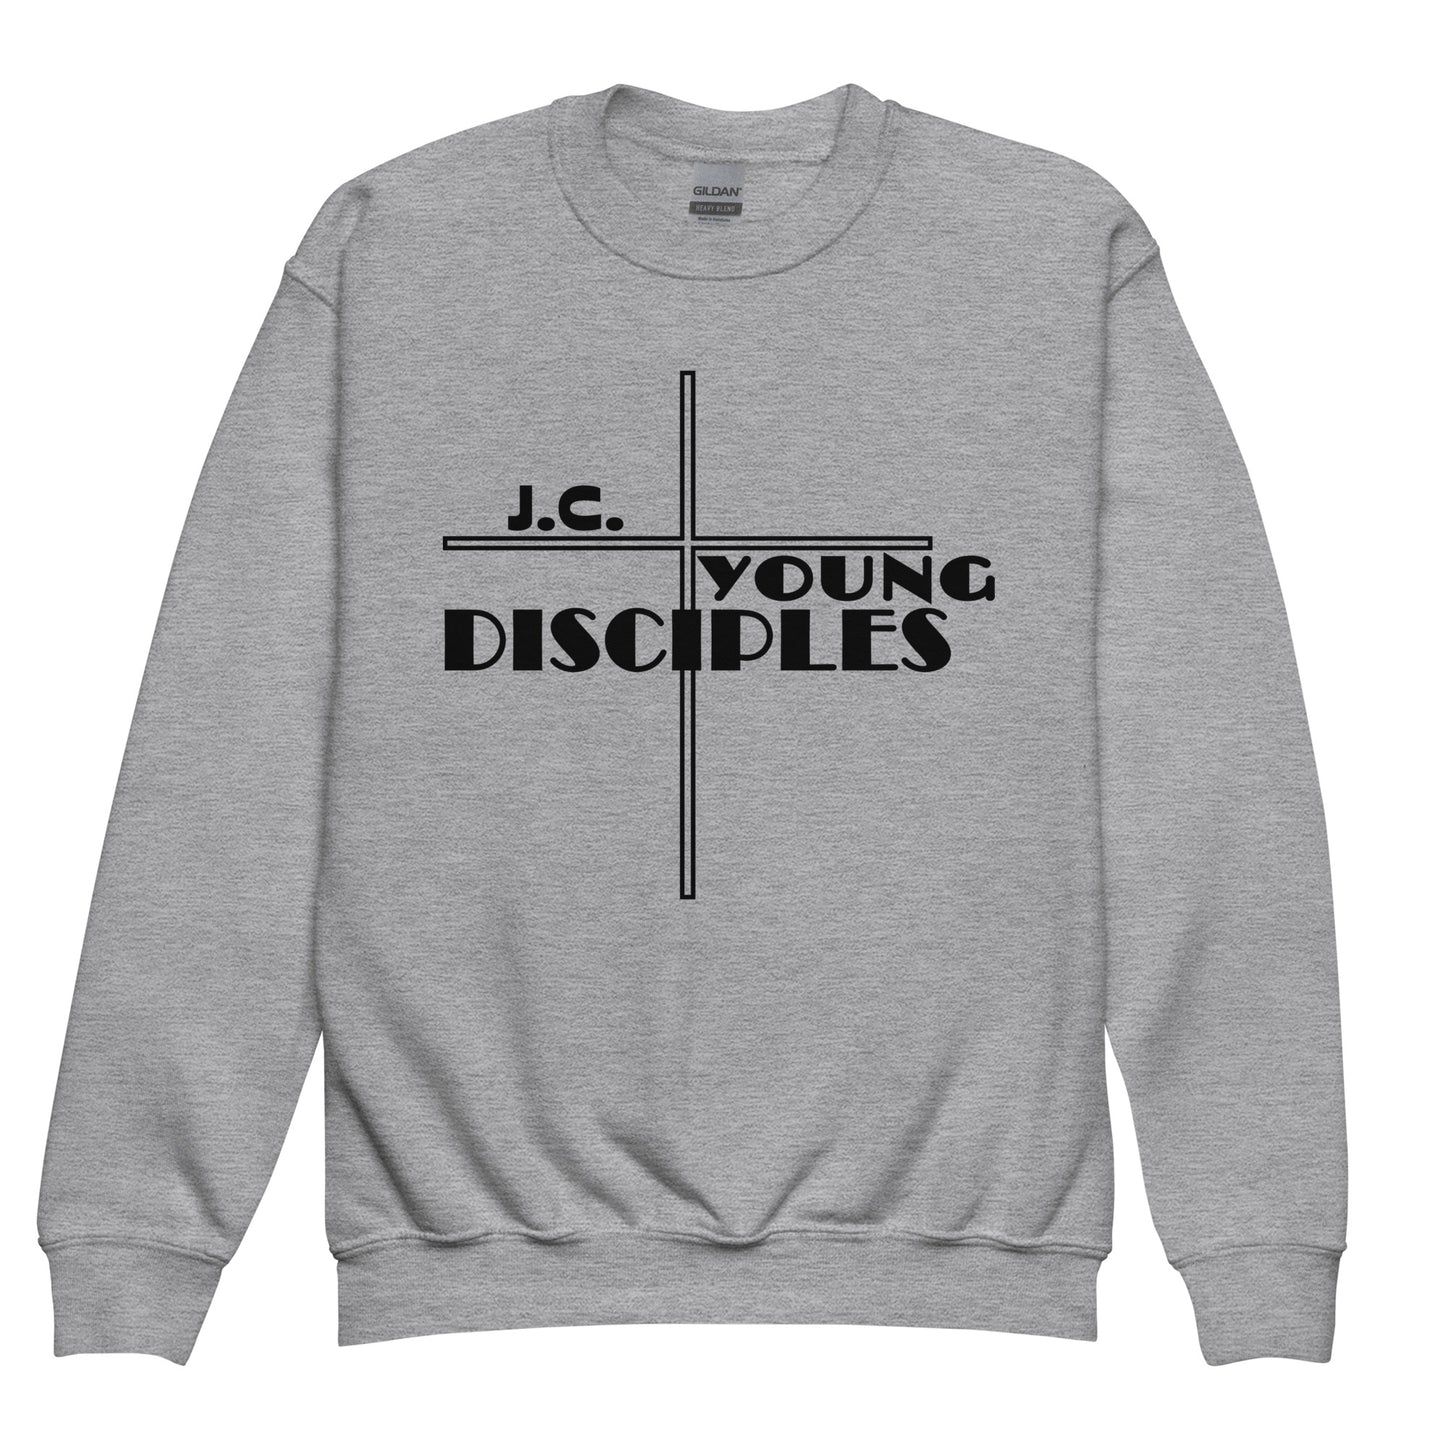 J.C. Young Disciples Youth Sweatshirt